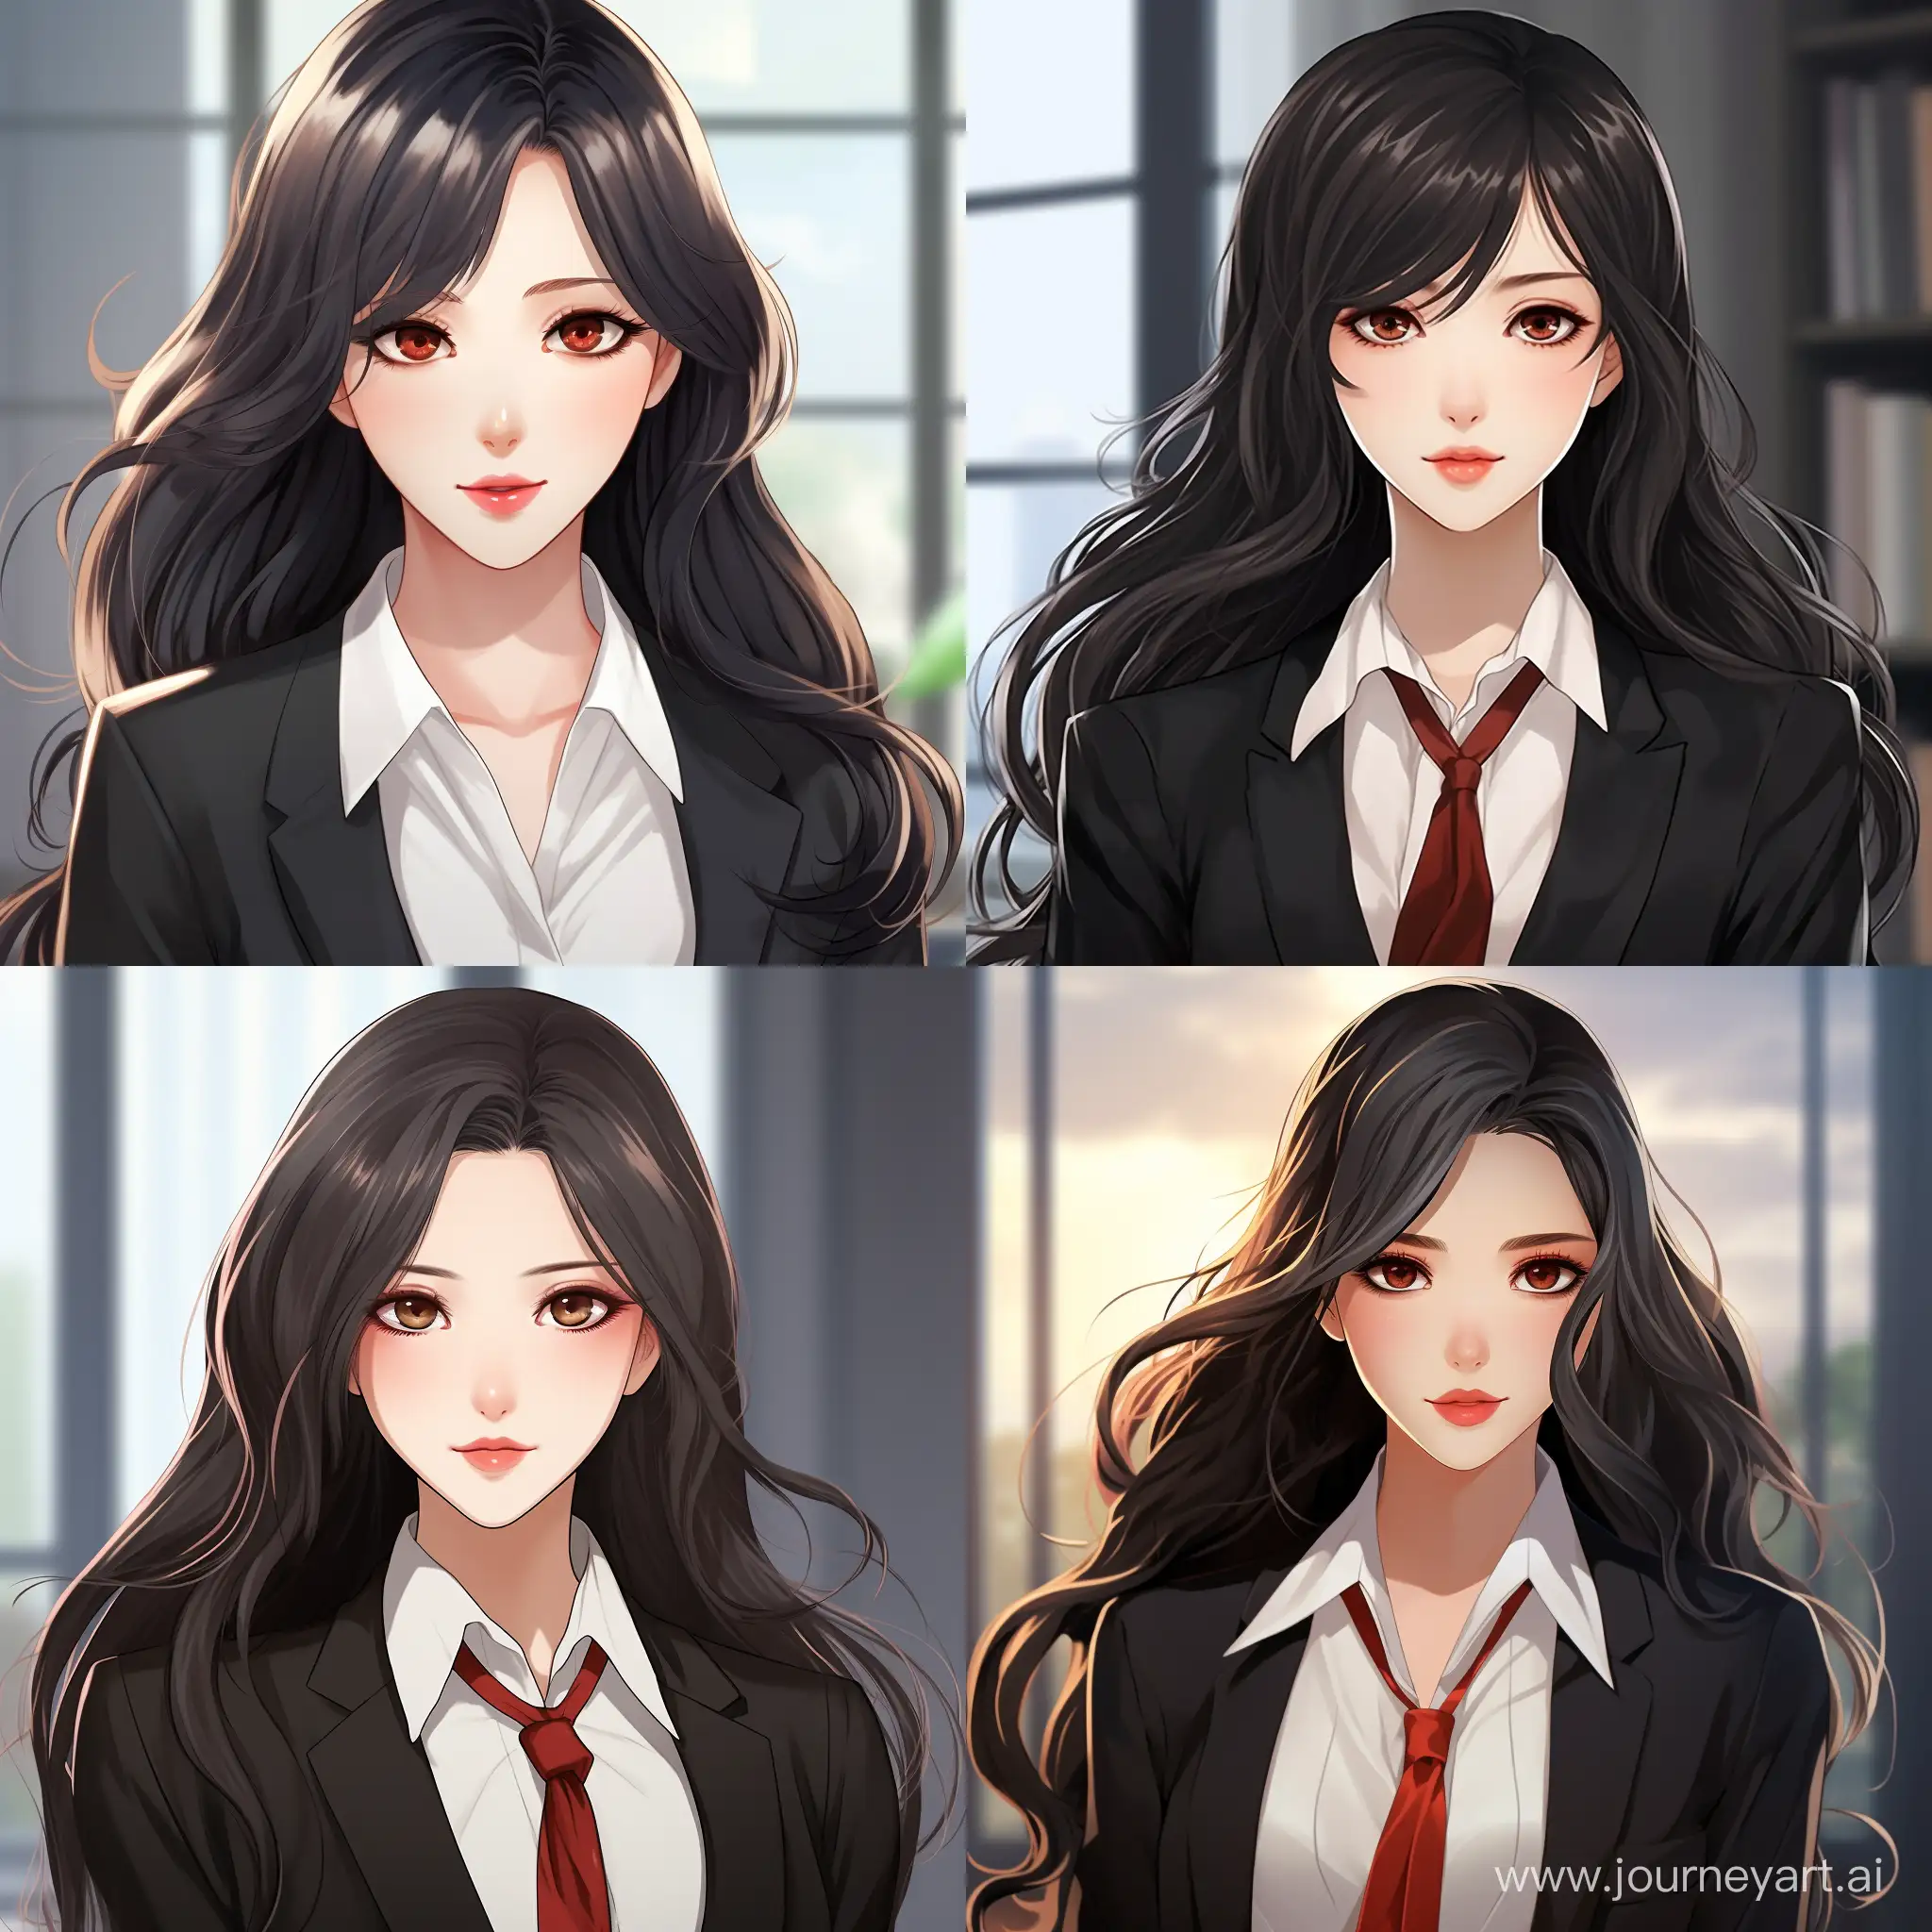 woman with long black hair and red eyes hypnosis. She wears a white shirt, a black suit and a red tie. She looks strict and elegant, but her gaze hides cunning and cruelty. She smiles often, but her smile is not kind,looking at viewer, unique art style, manhwa style, anime style